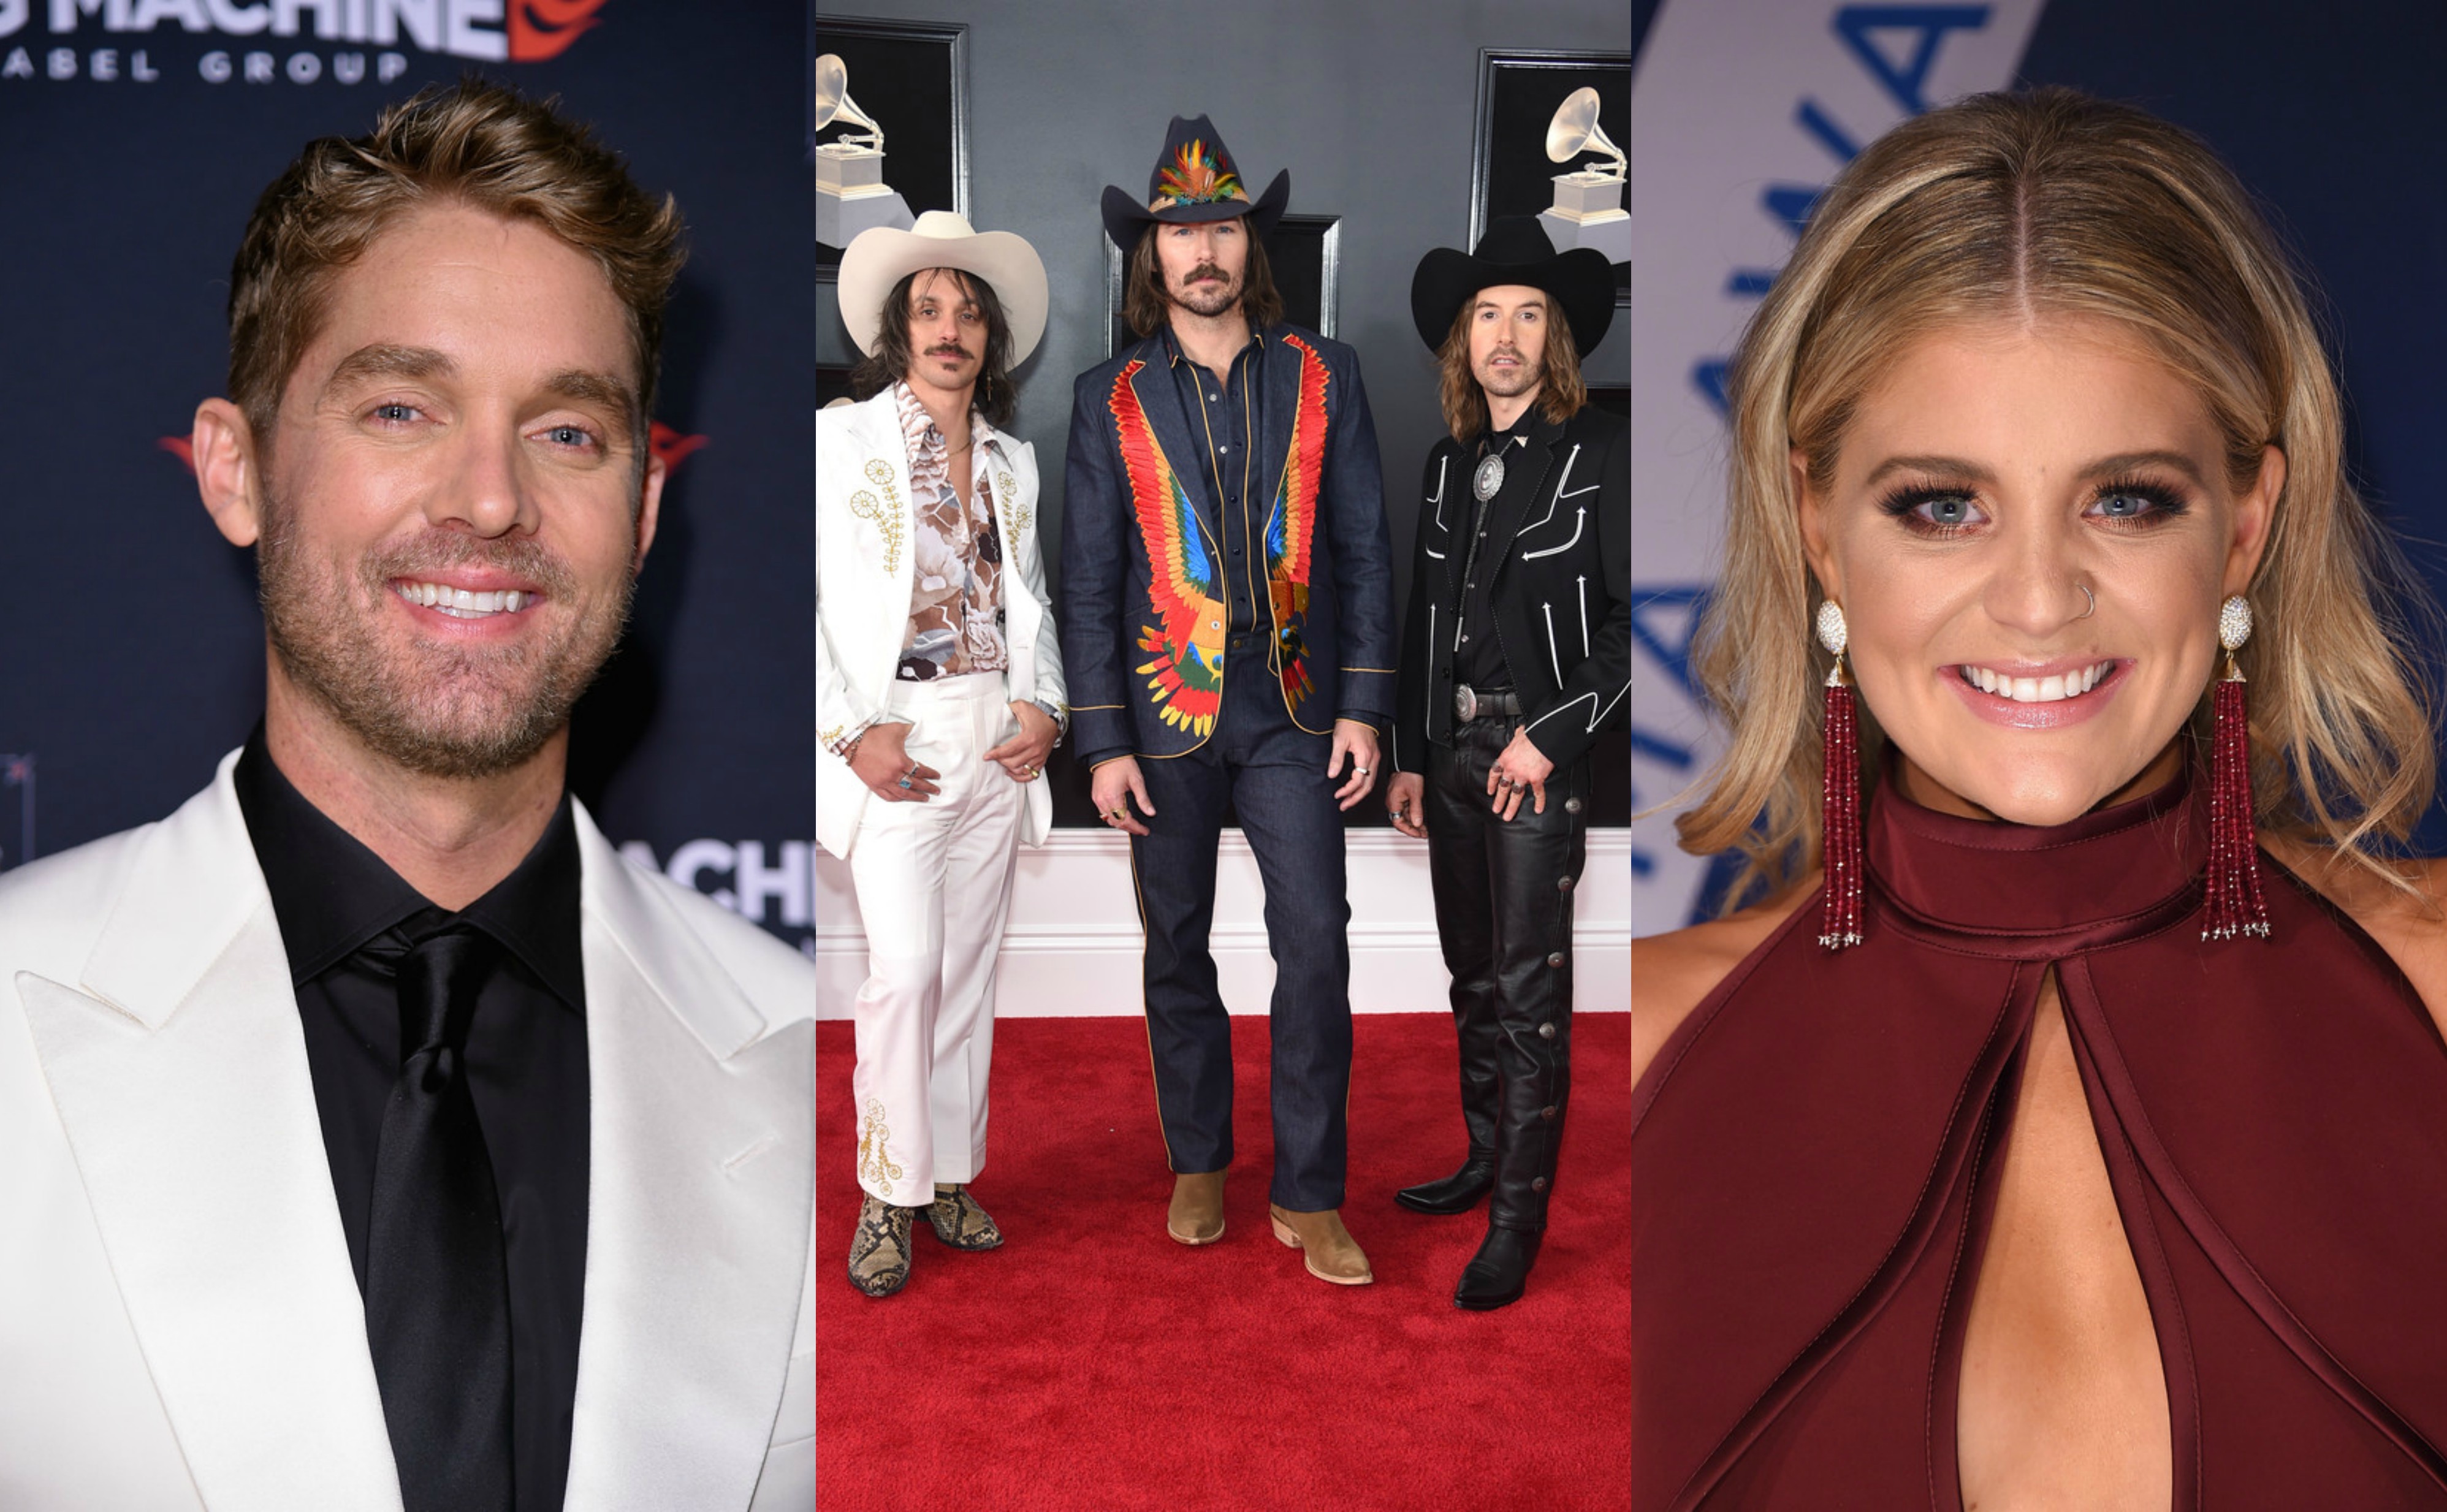 Lauren Alaina, Midland, and Brett Young Win Big Ahead of 53rd Academy of Country Music Awards